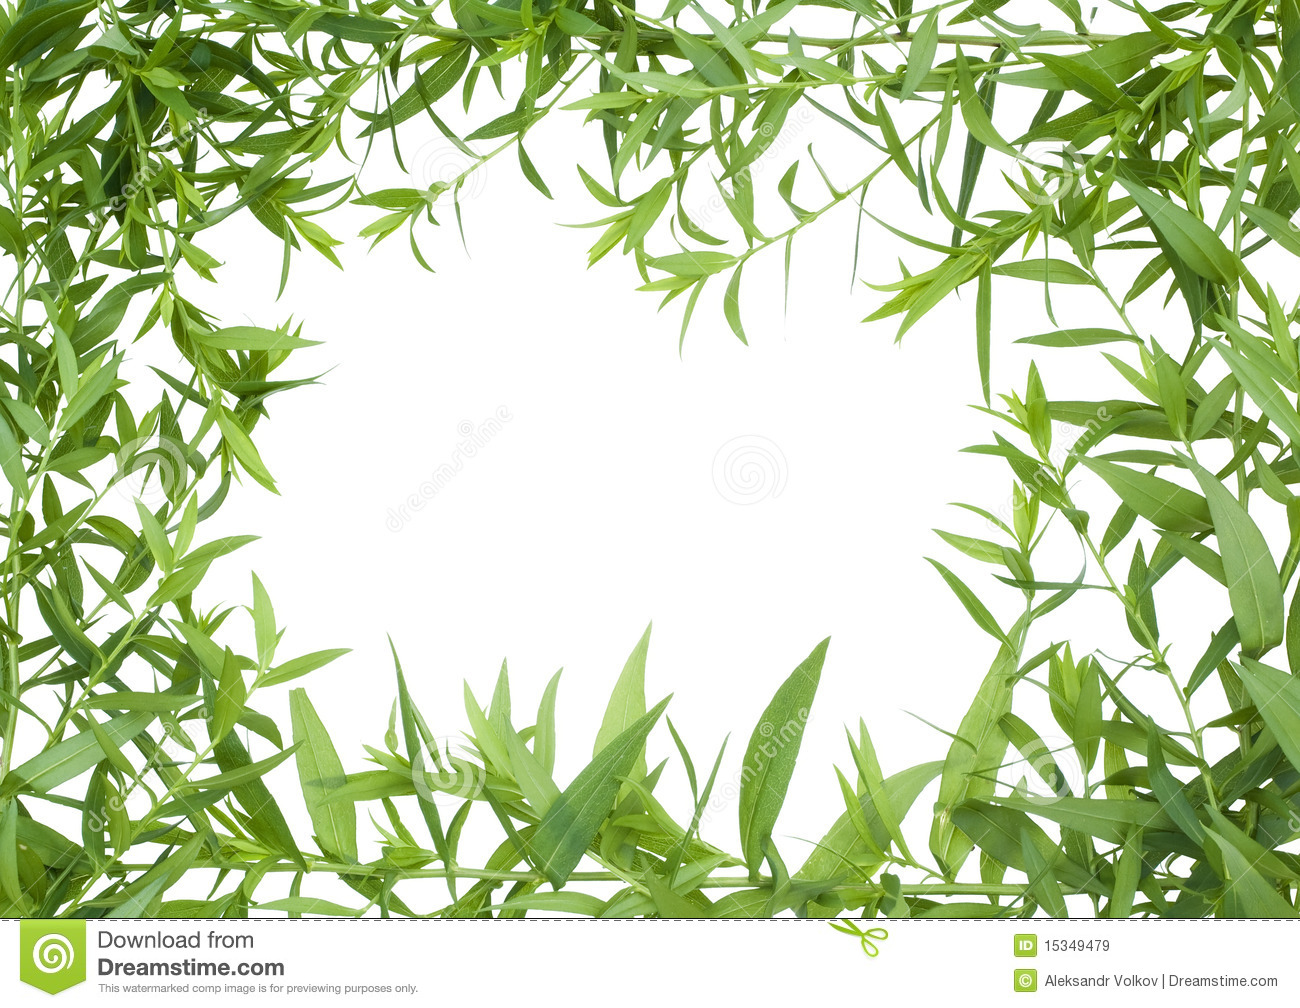 Jungle Frame Royalty Free Stock Images   Image  15349479